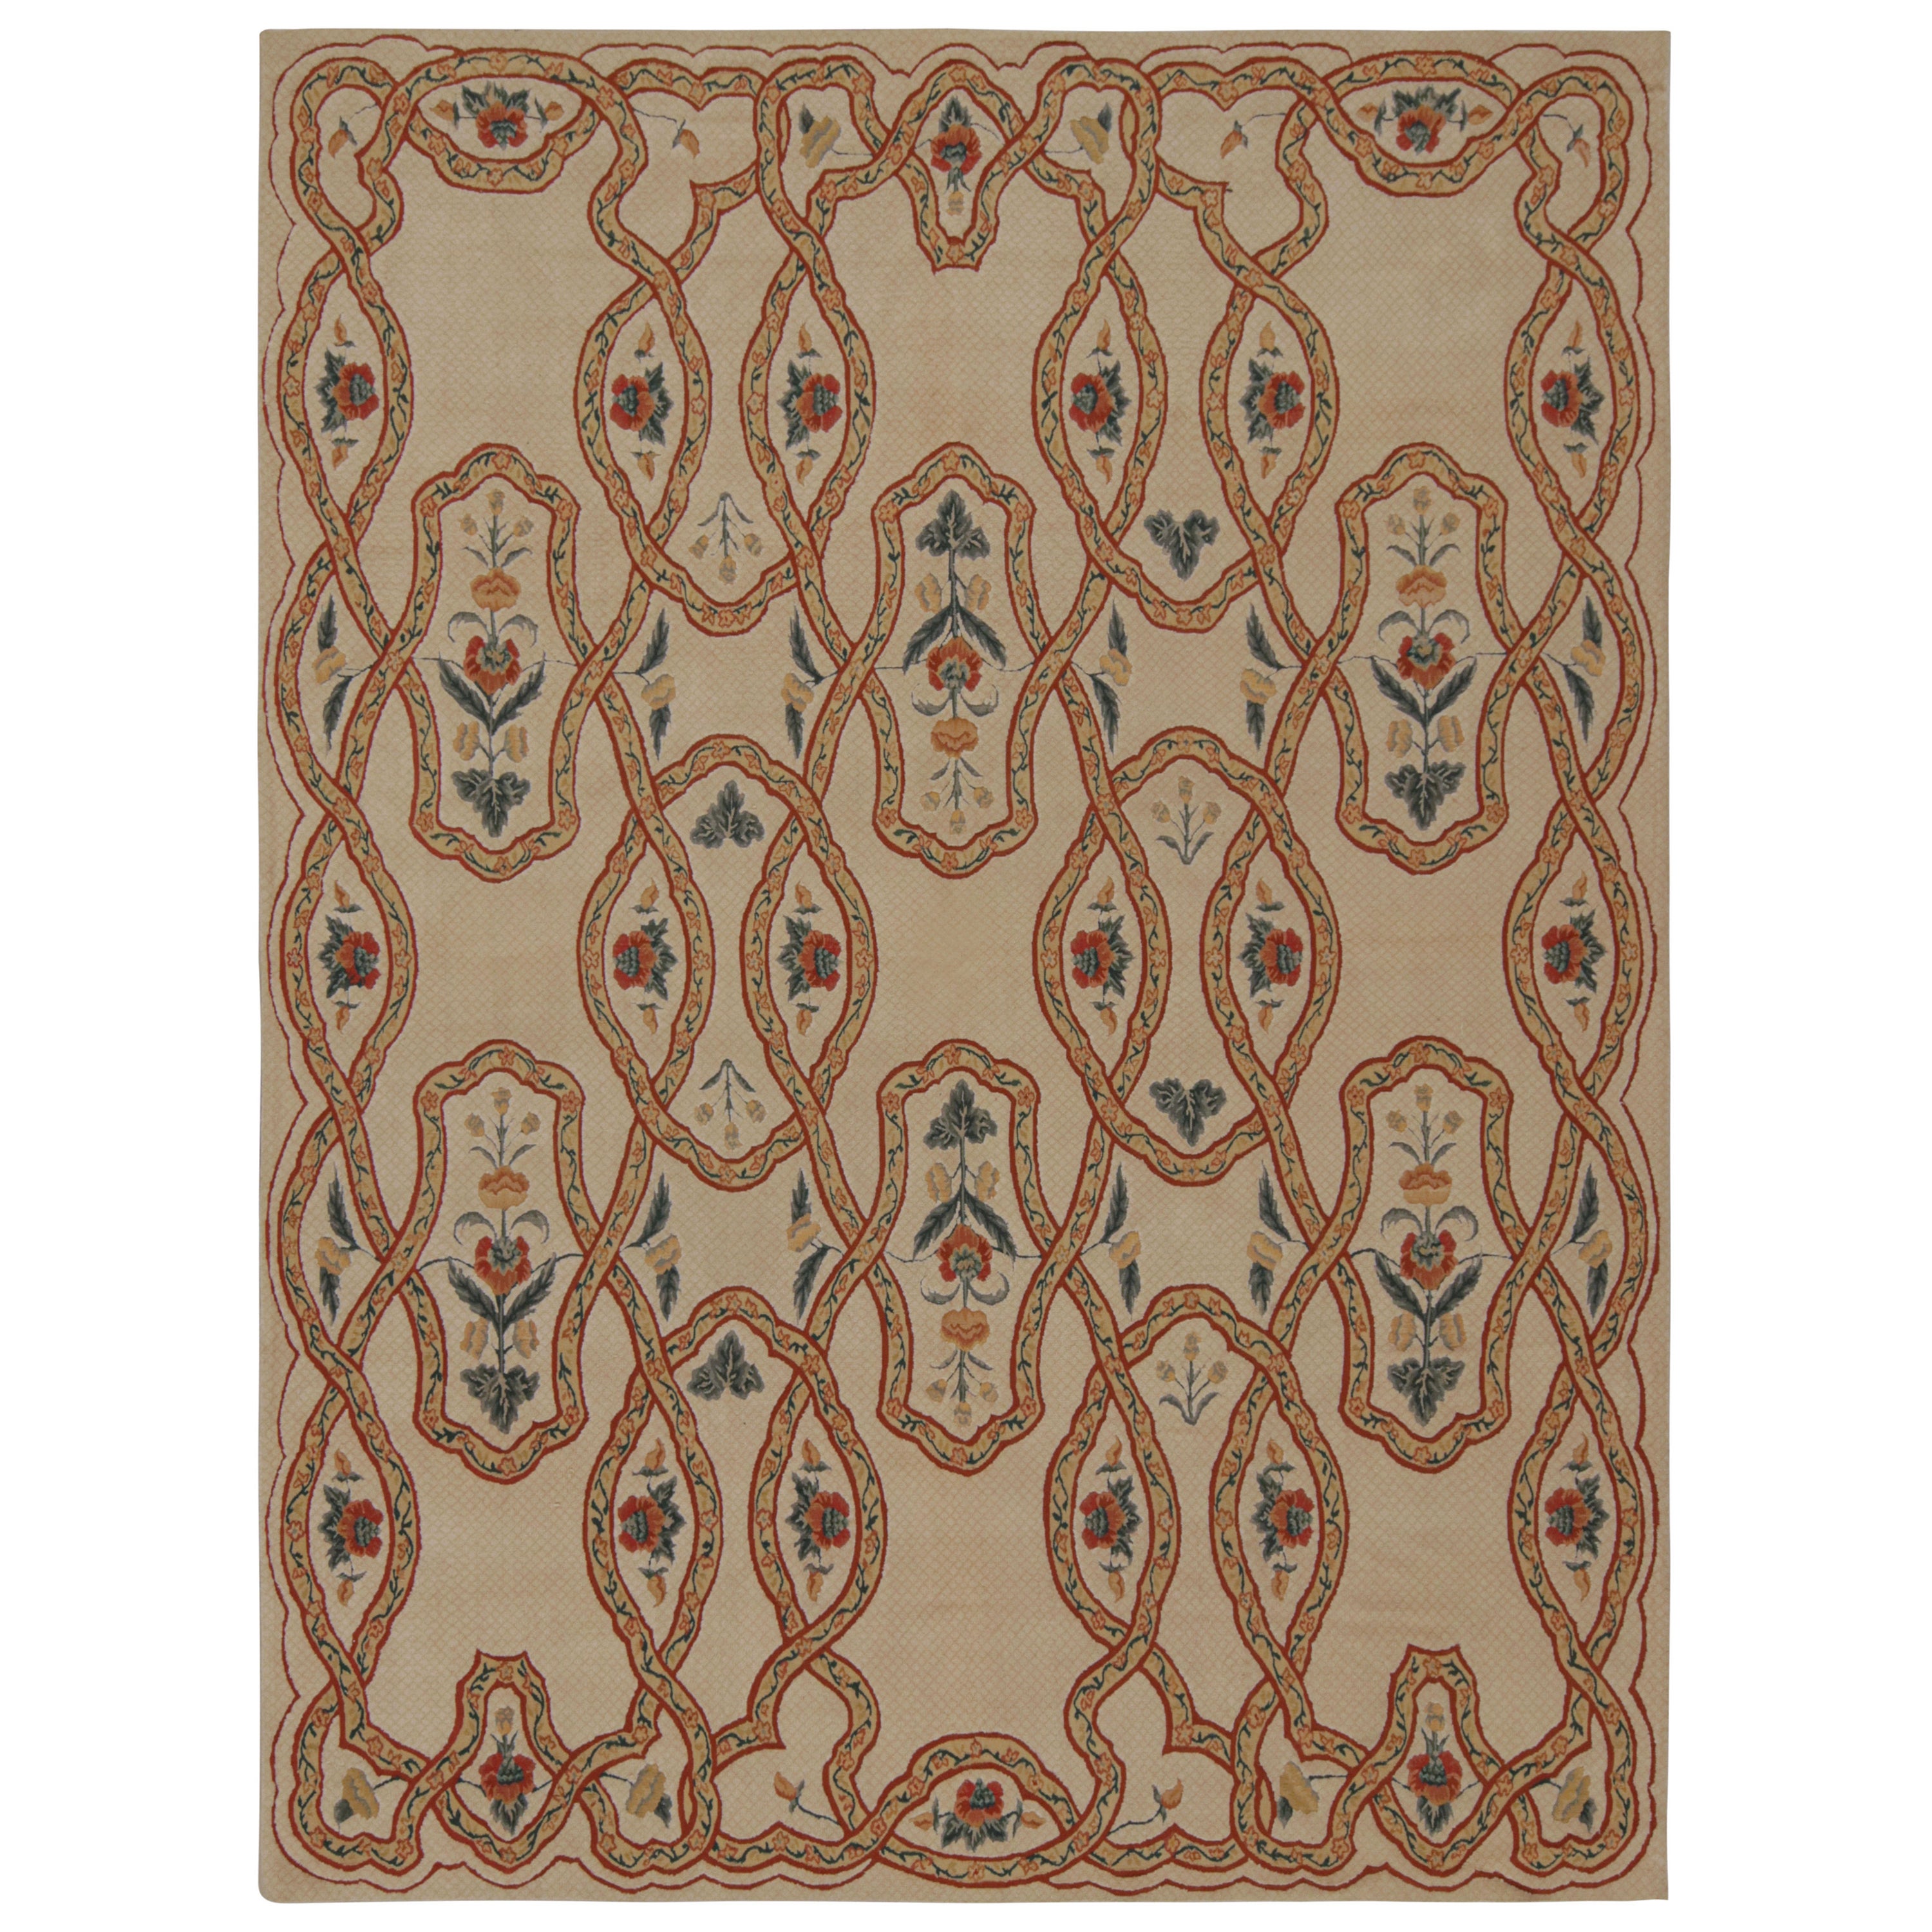 Rug & kilim’s European Rug in Beige, with Green and Red Floral Patterns